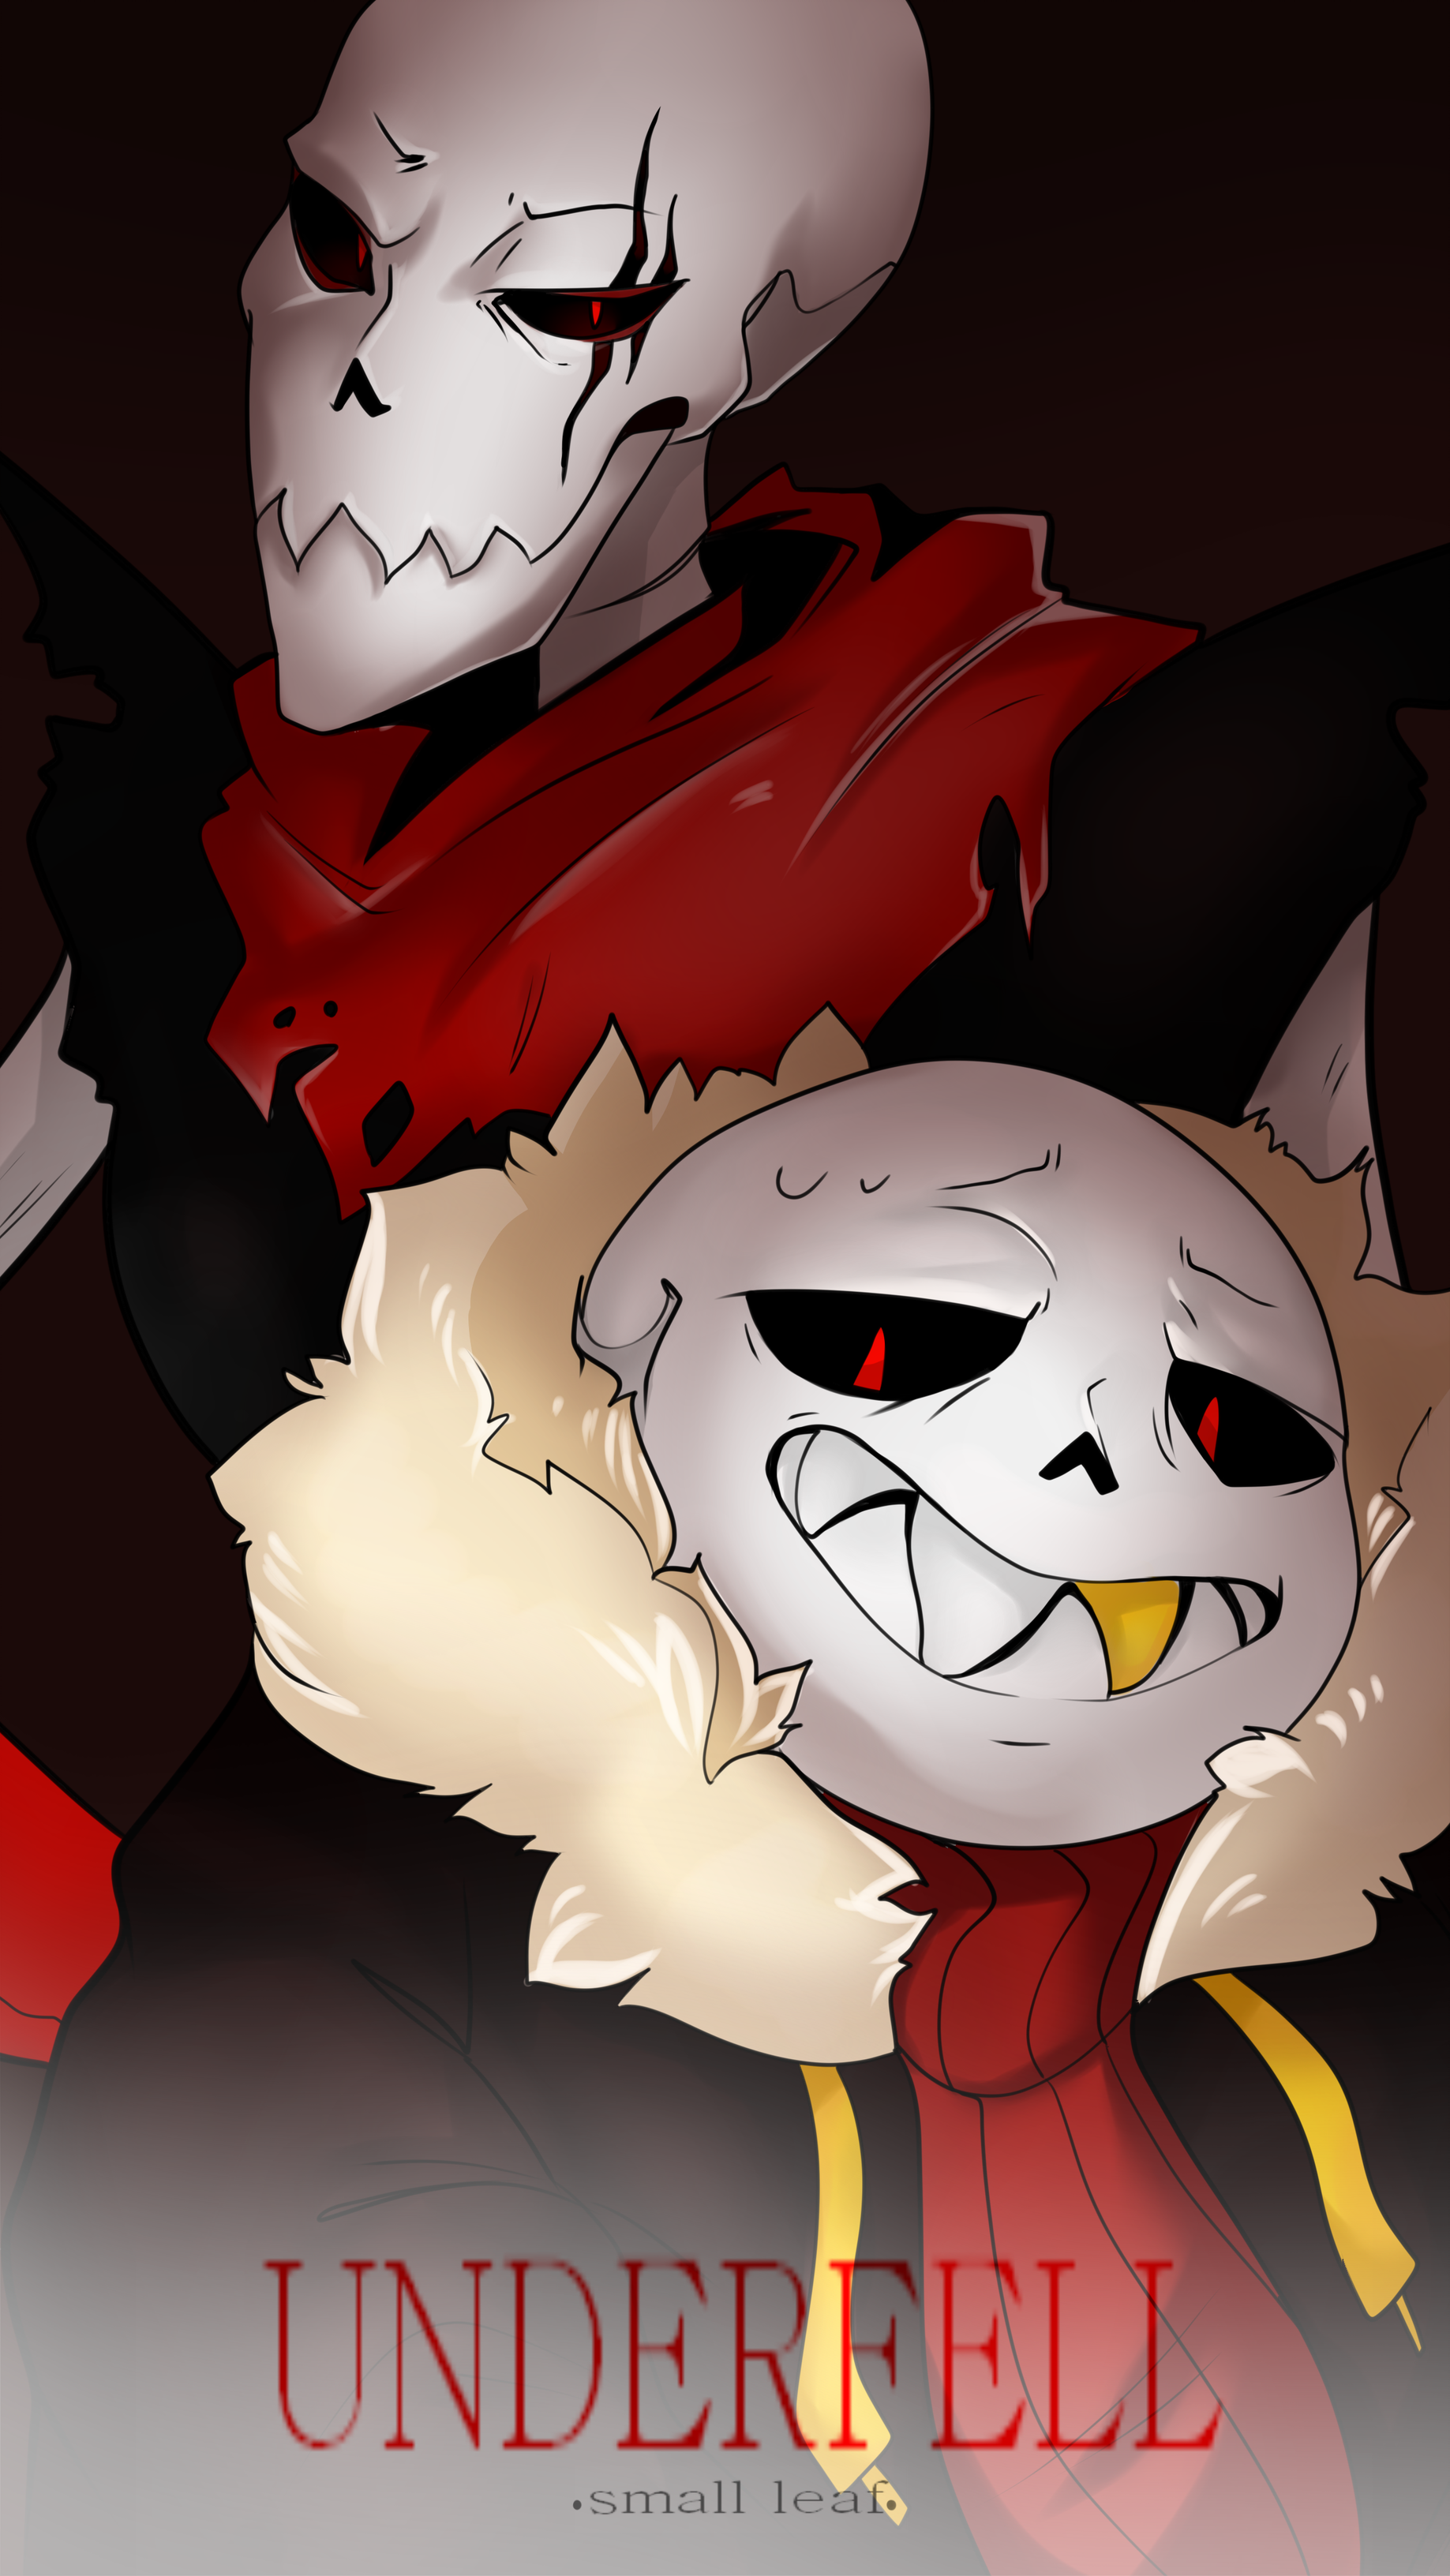 Sans and Papyrus- Underfell by Small-leaf-v on DeviantArt